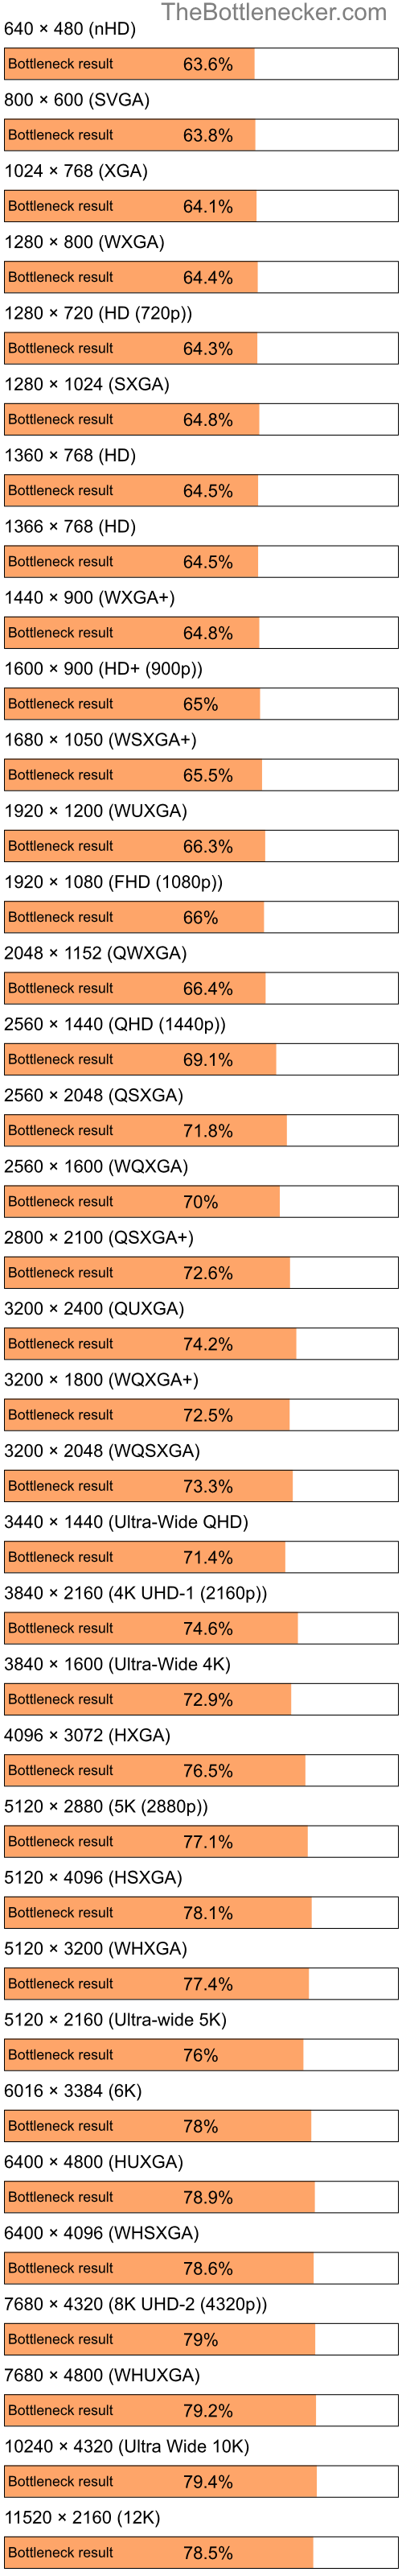 Bottleneck results by resolution for Intel Pentium 4 and NVIDIA GeForce 9300M GS in General Tasks